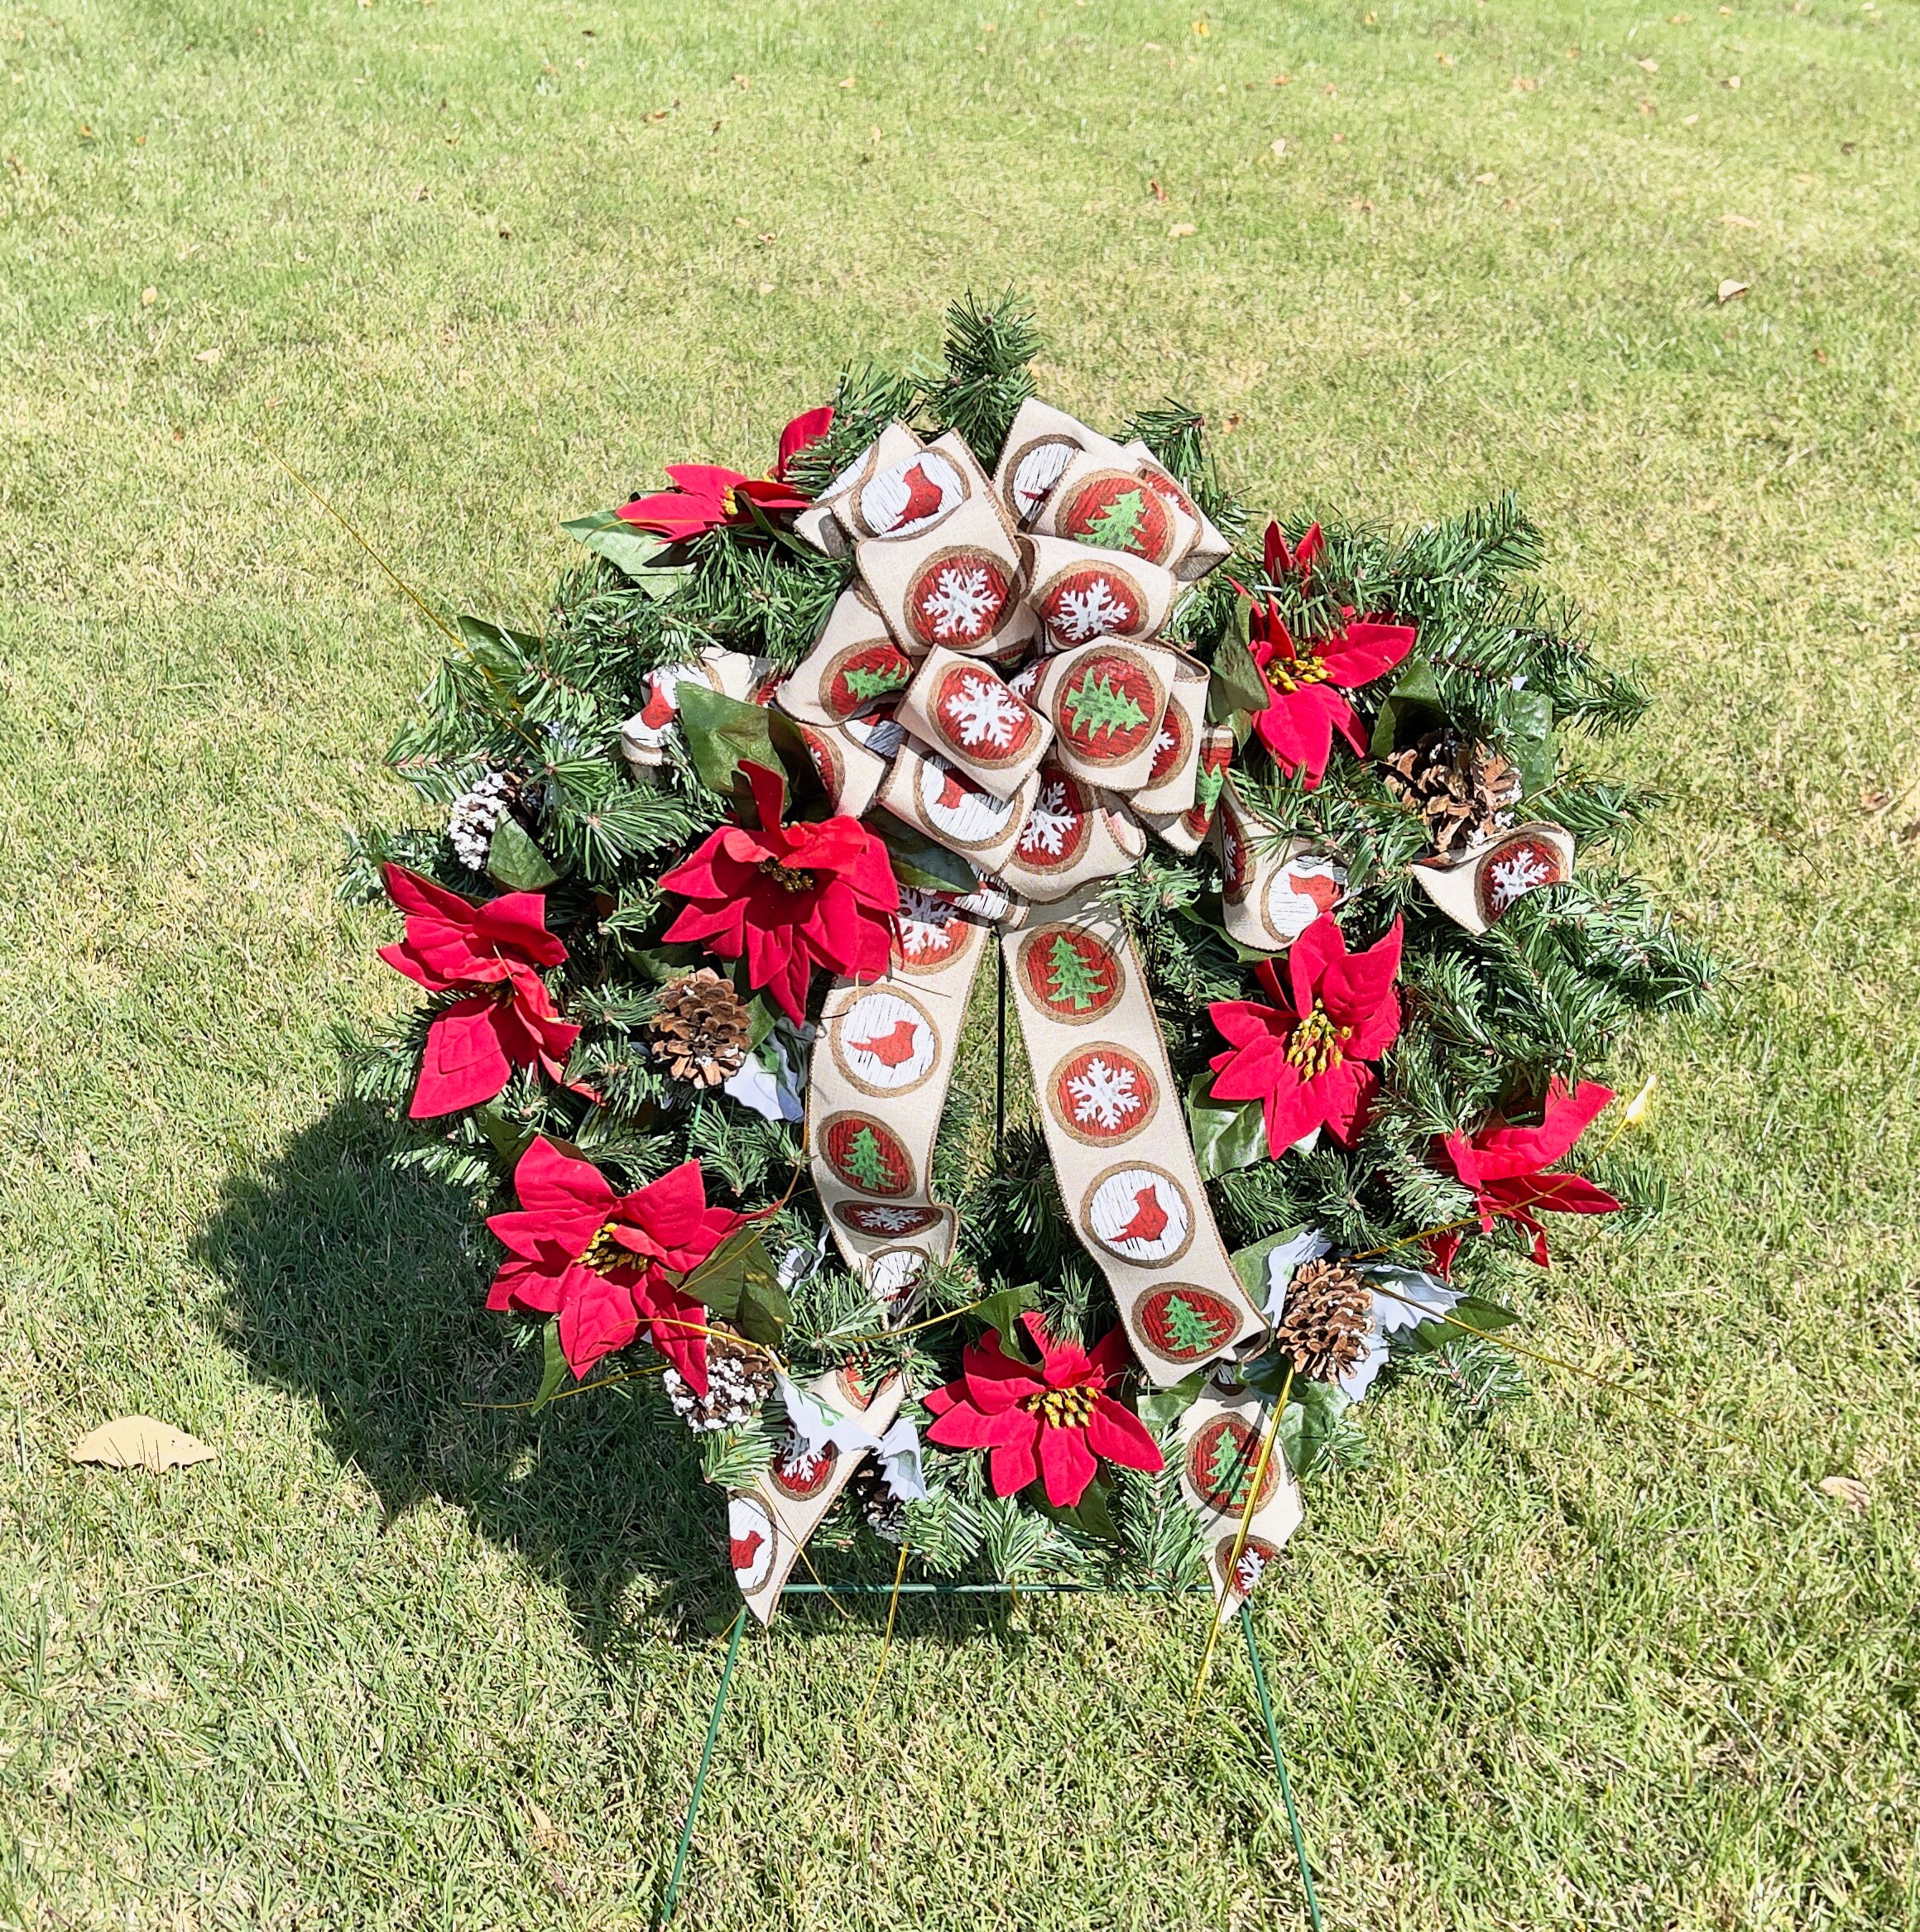 SHINCEL Wreath Stand for Cemetery In Ground, Gravesite, Christmas Wreath  Hanger for Display Funeral,Heavy Duty Grave Marker Garland Hook for  Memorial